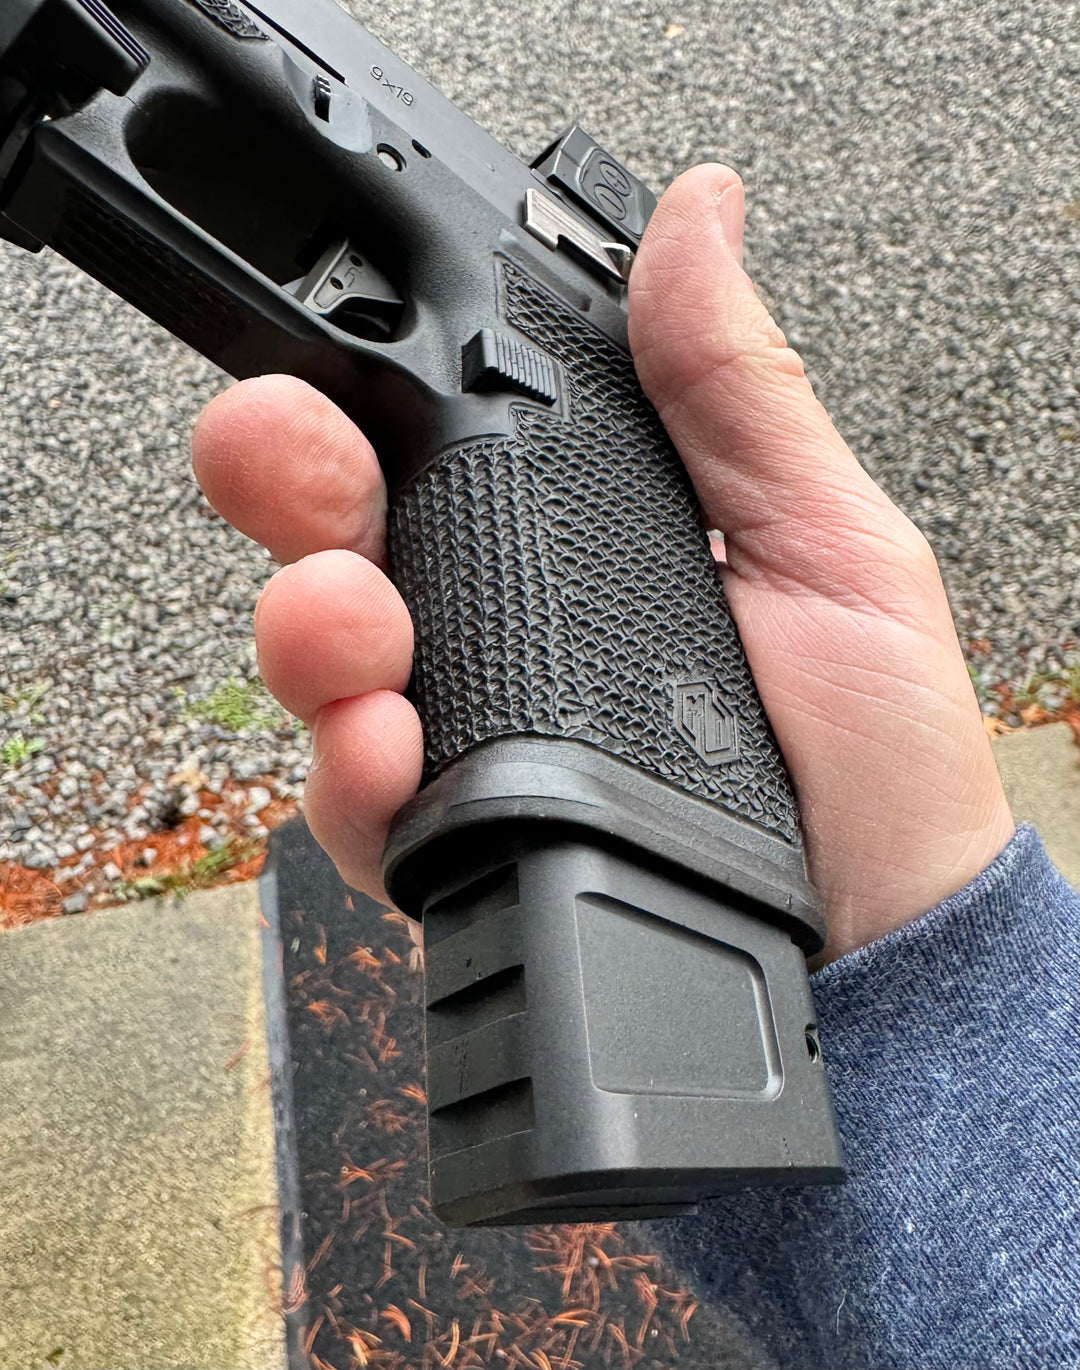 +2/+5 Mag Extension for Glock 19/26 - Herrington Arms 